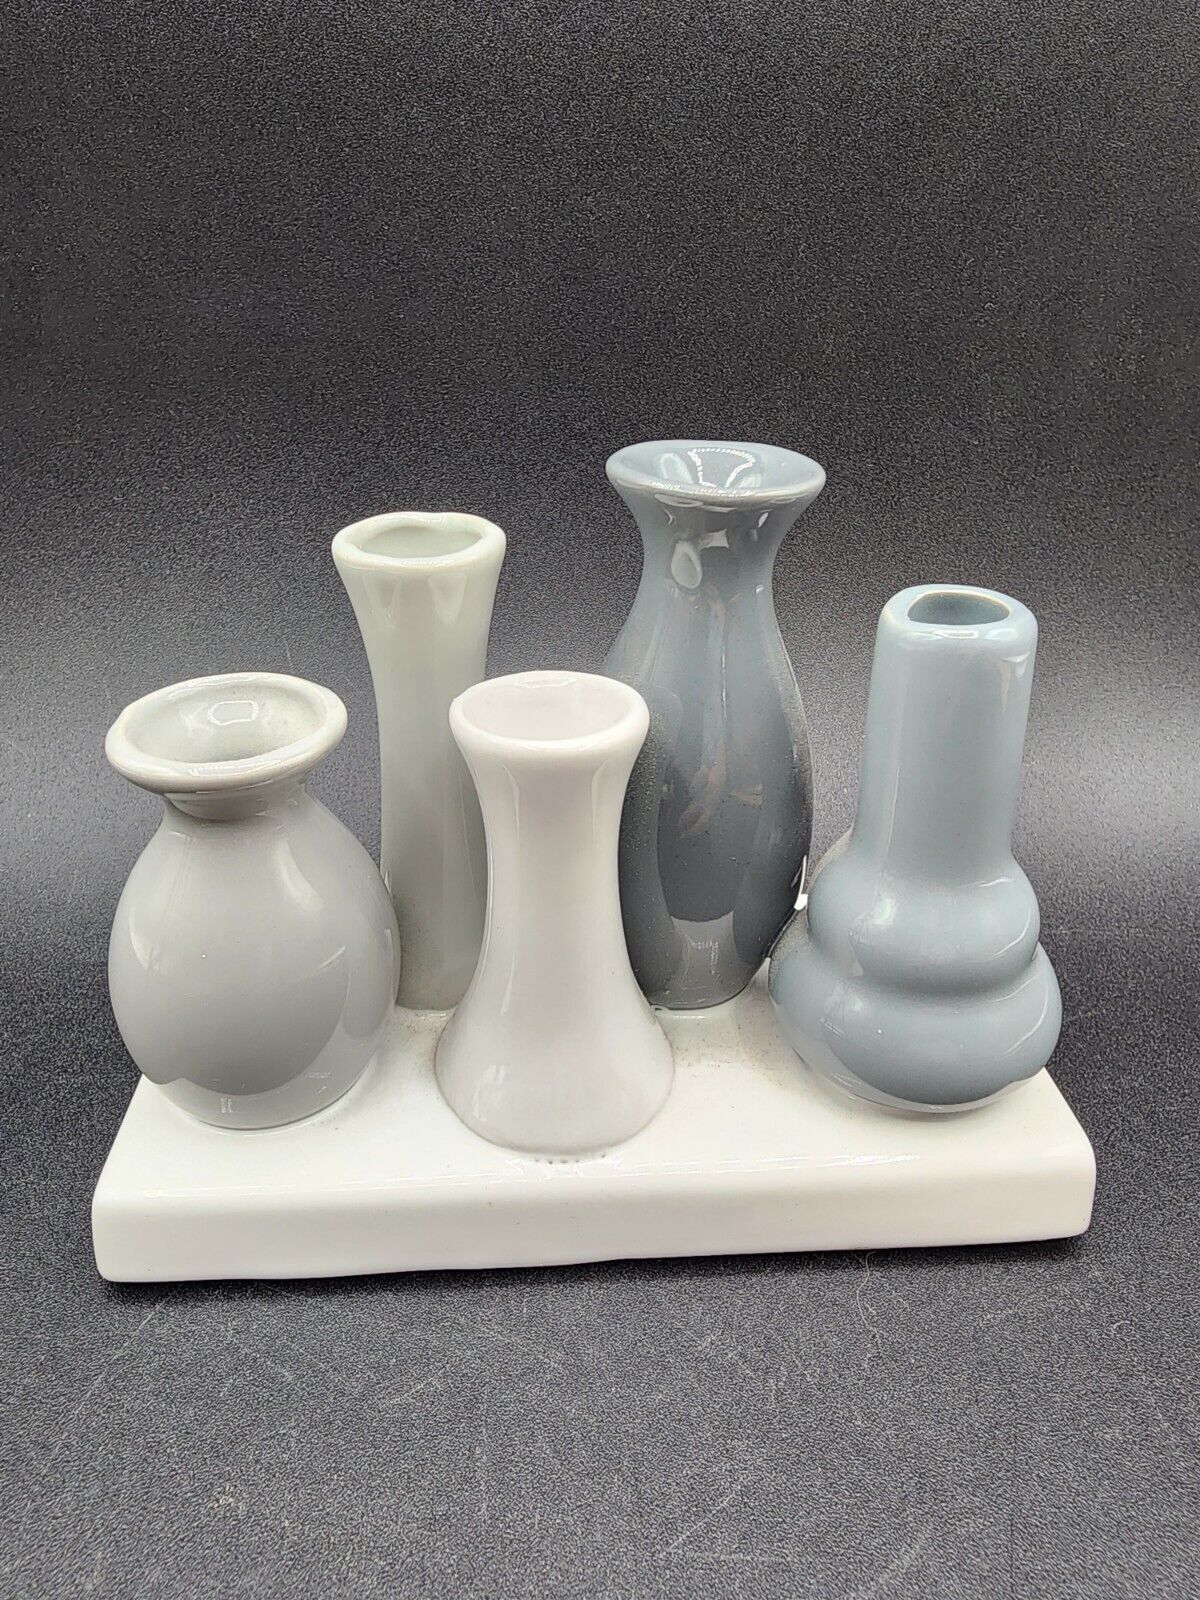 Multi Connected 5 Bud vases Gray Neutral Tones